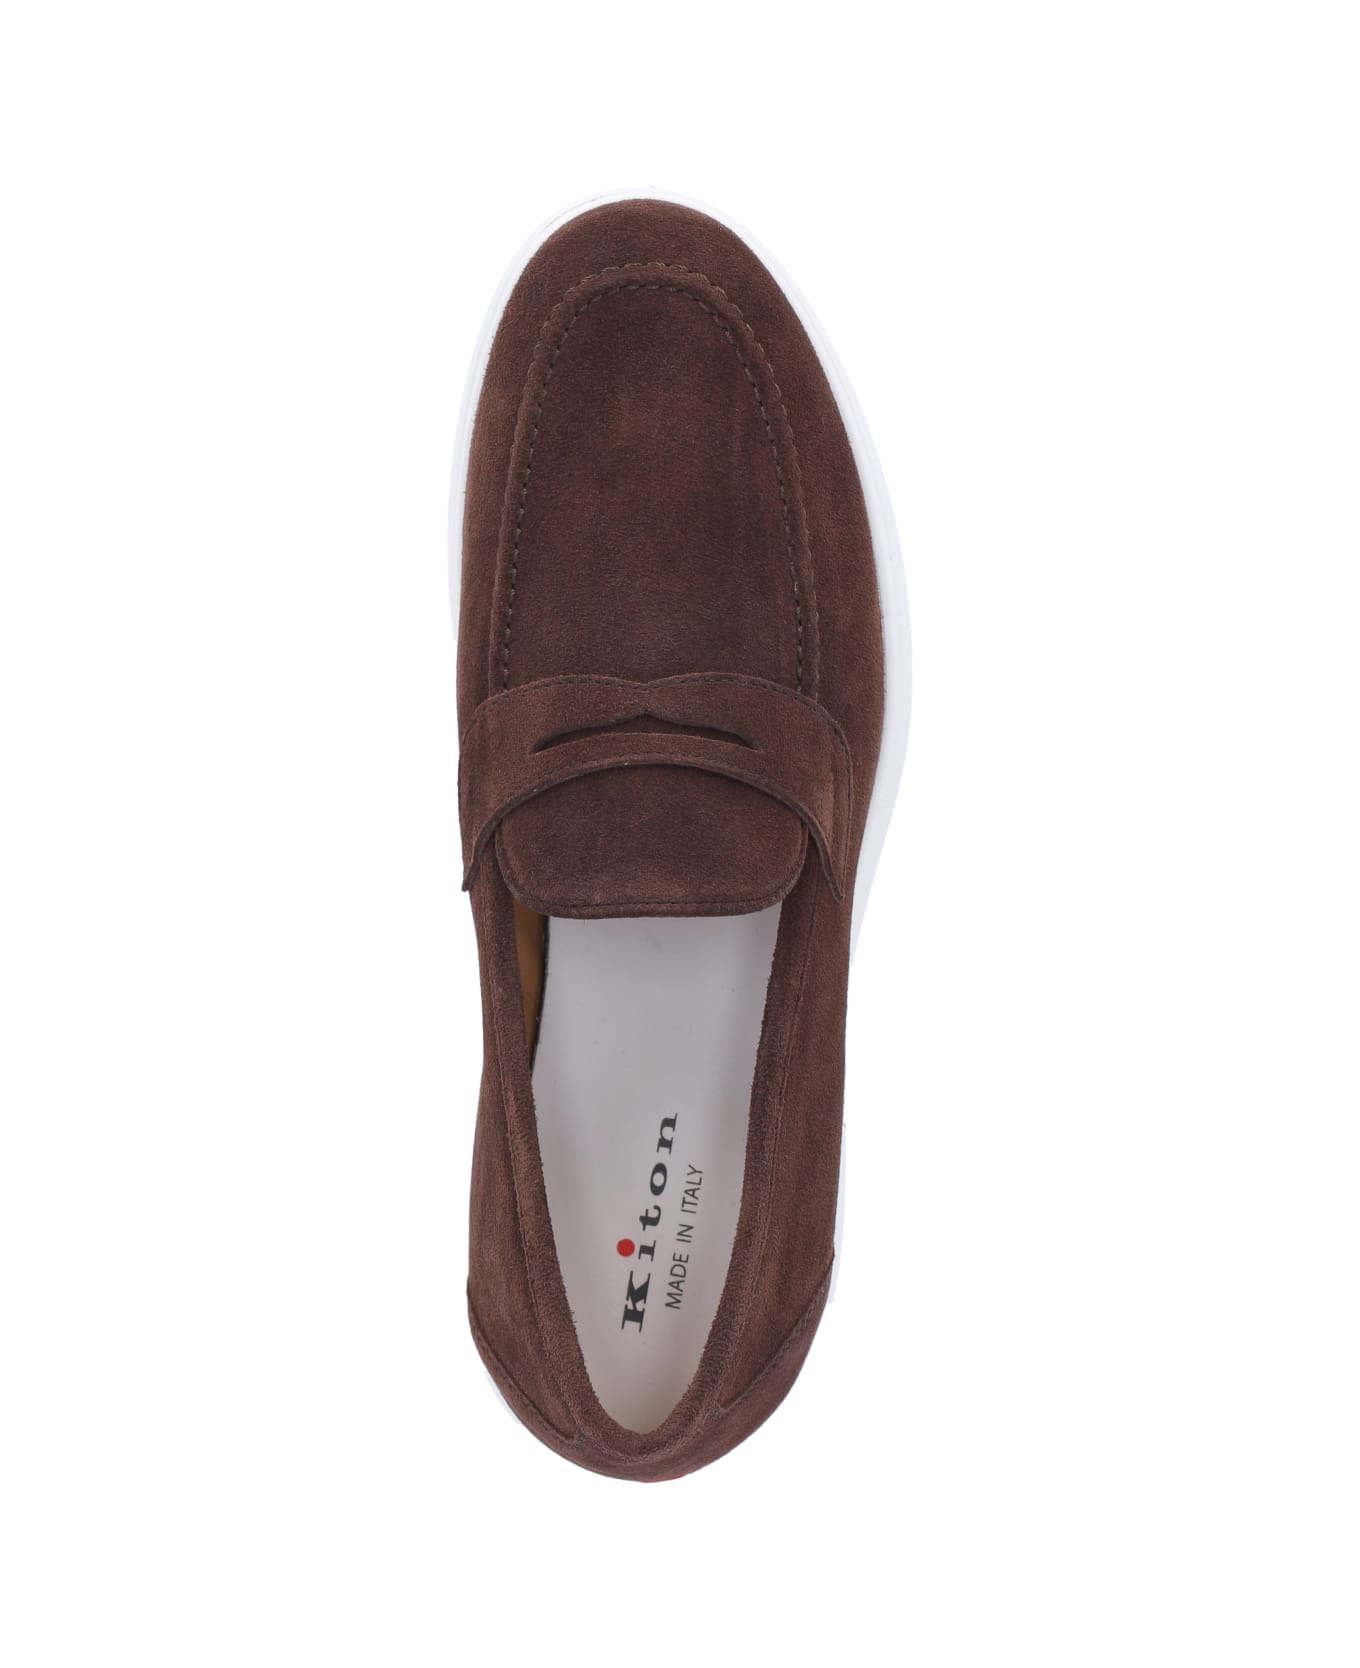 Kiton Suede Loafers - Brown ローファー＆デッキシューズ